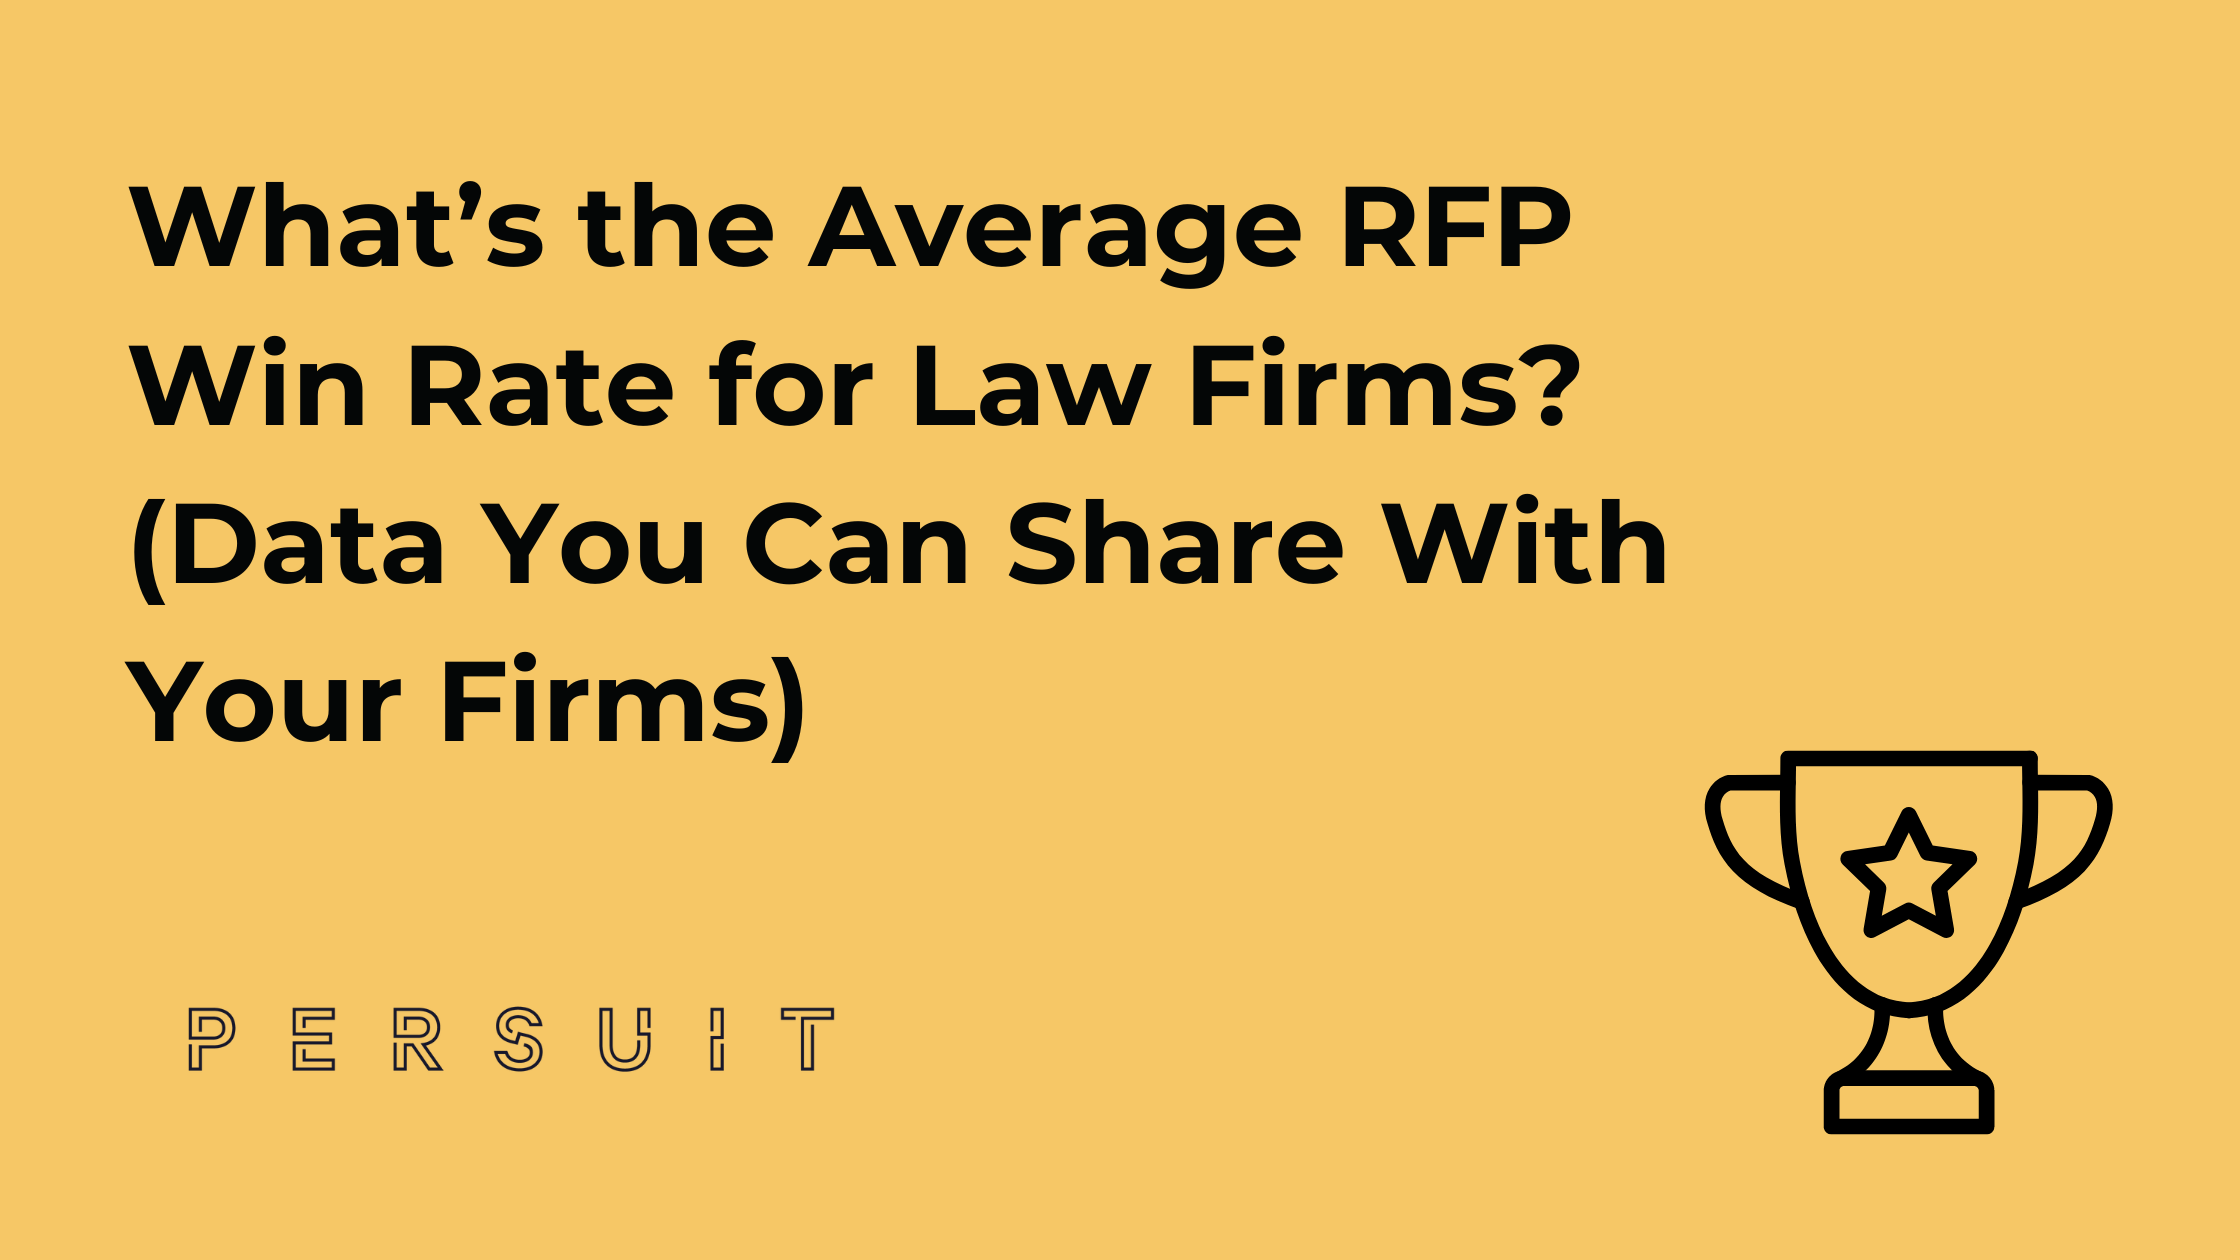 What’s the Average RFP Win Rate for Law Firms? (Data You Can Share With Your Firms)